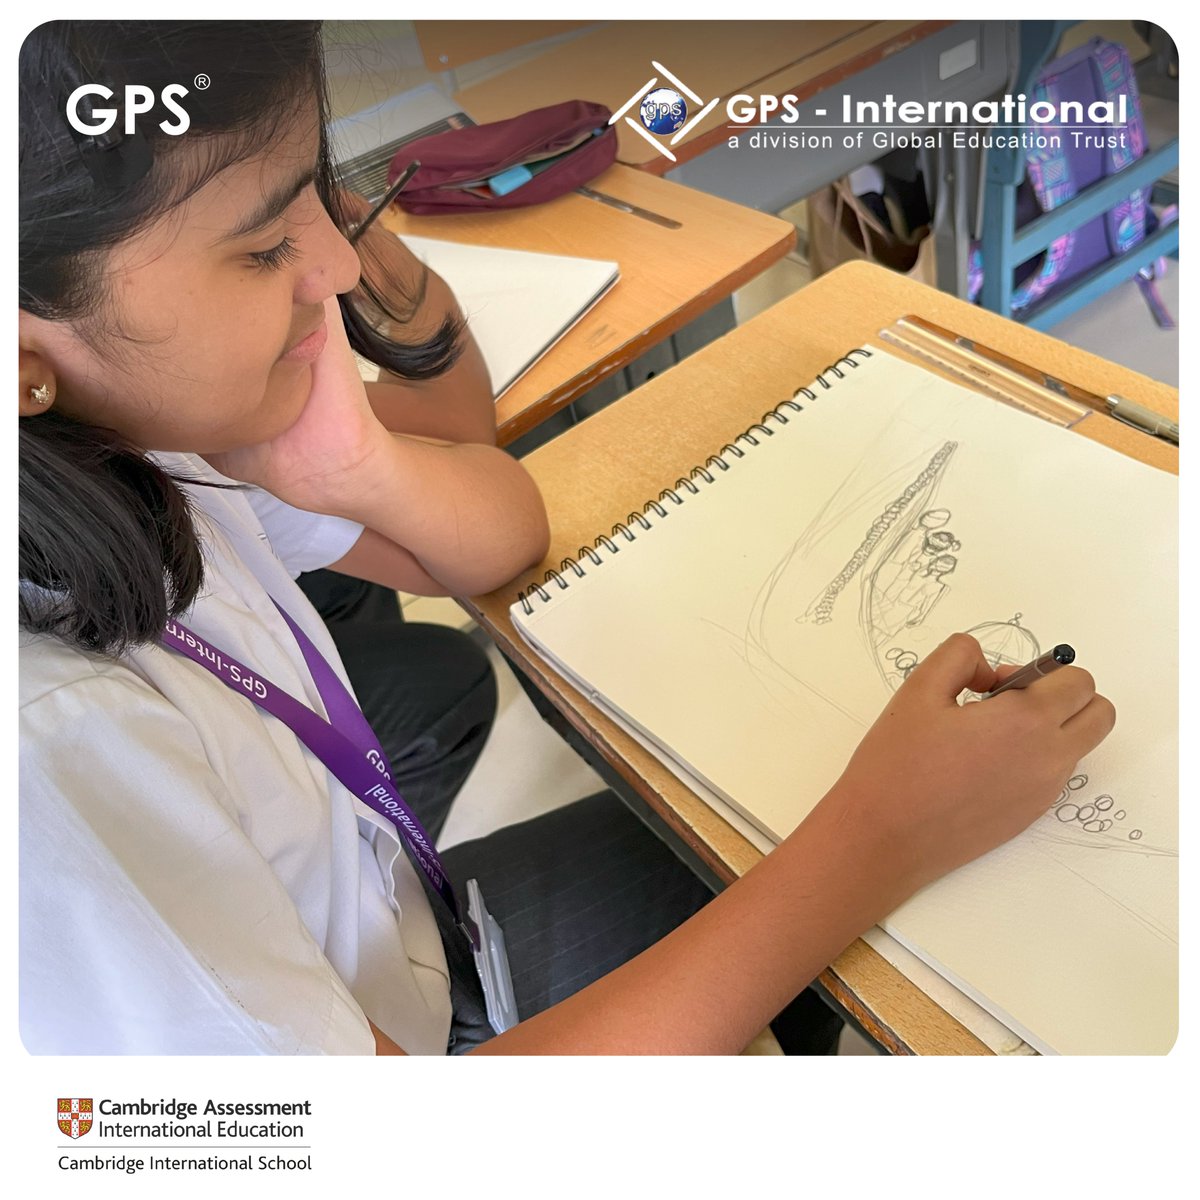 GPS students create artwork inspired by Onam using white, green, orange, and many more colours!
#onam #student #LEARNTHECAMBRIDGEWAY #CambridgeSchools #CambridgeLearners #caie #internationalschool #international #globalschools #gpsinternational